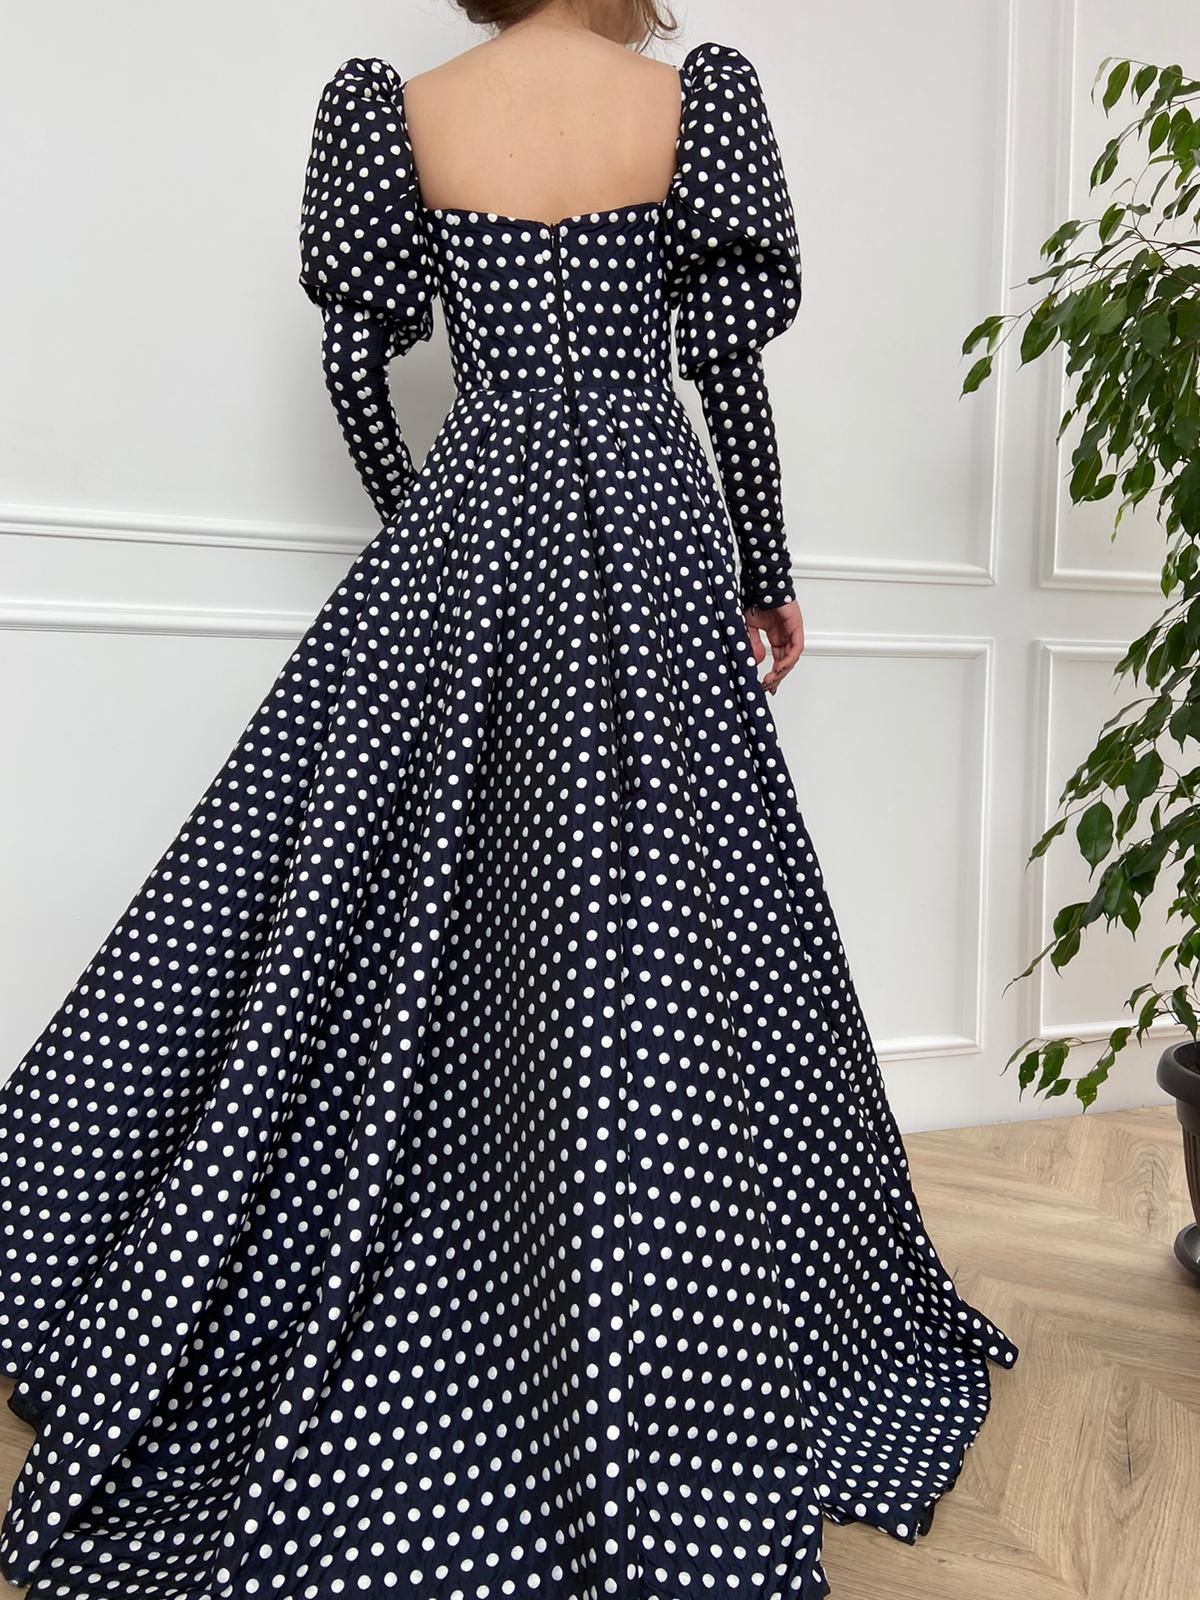 Black A-Line dotted dress with long sleeves